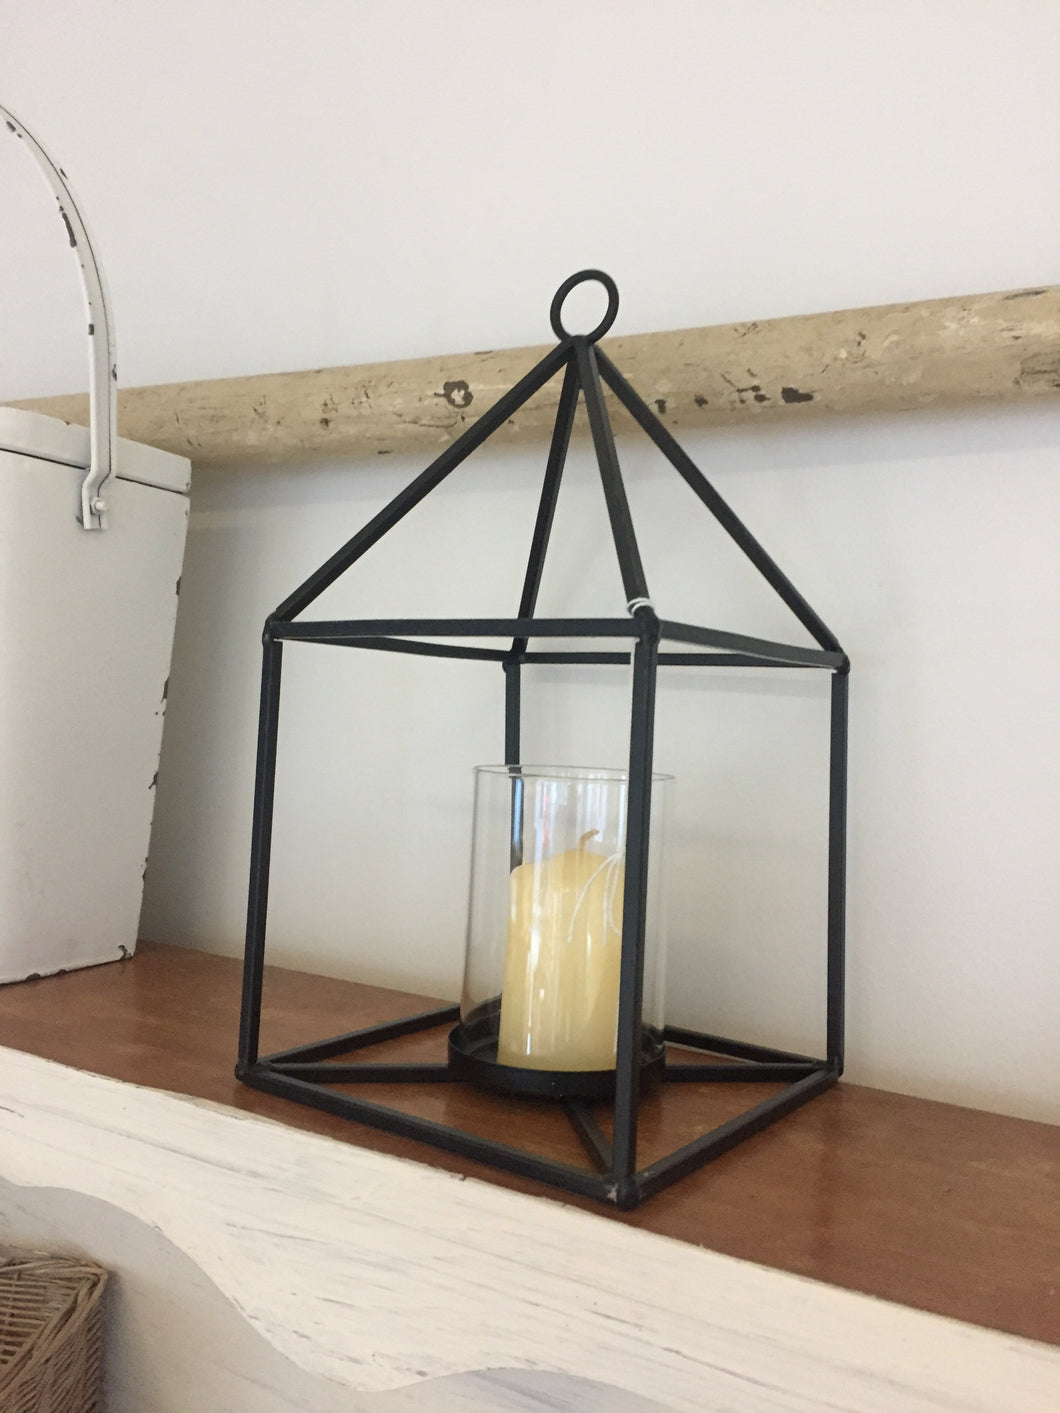 Small 'pyramid' candle holder